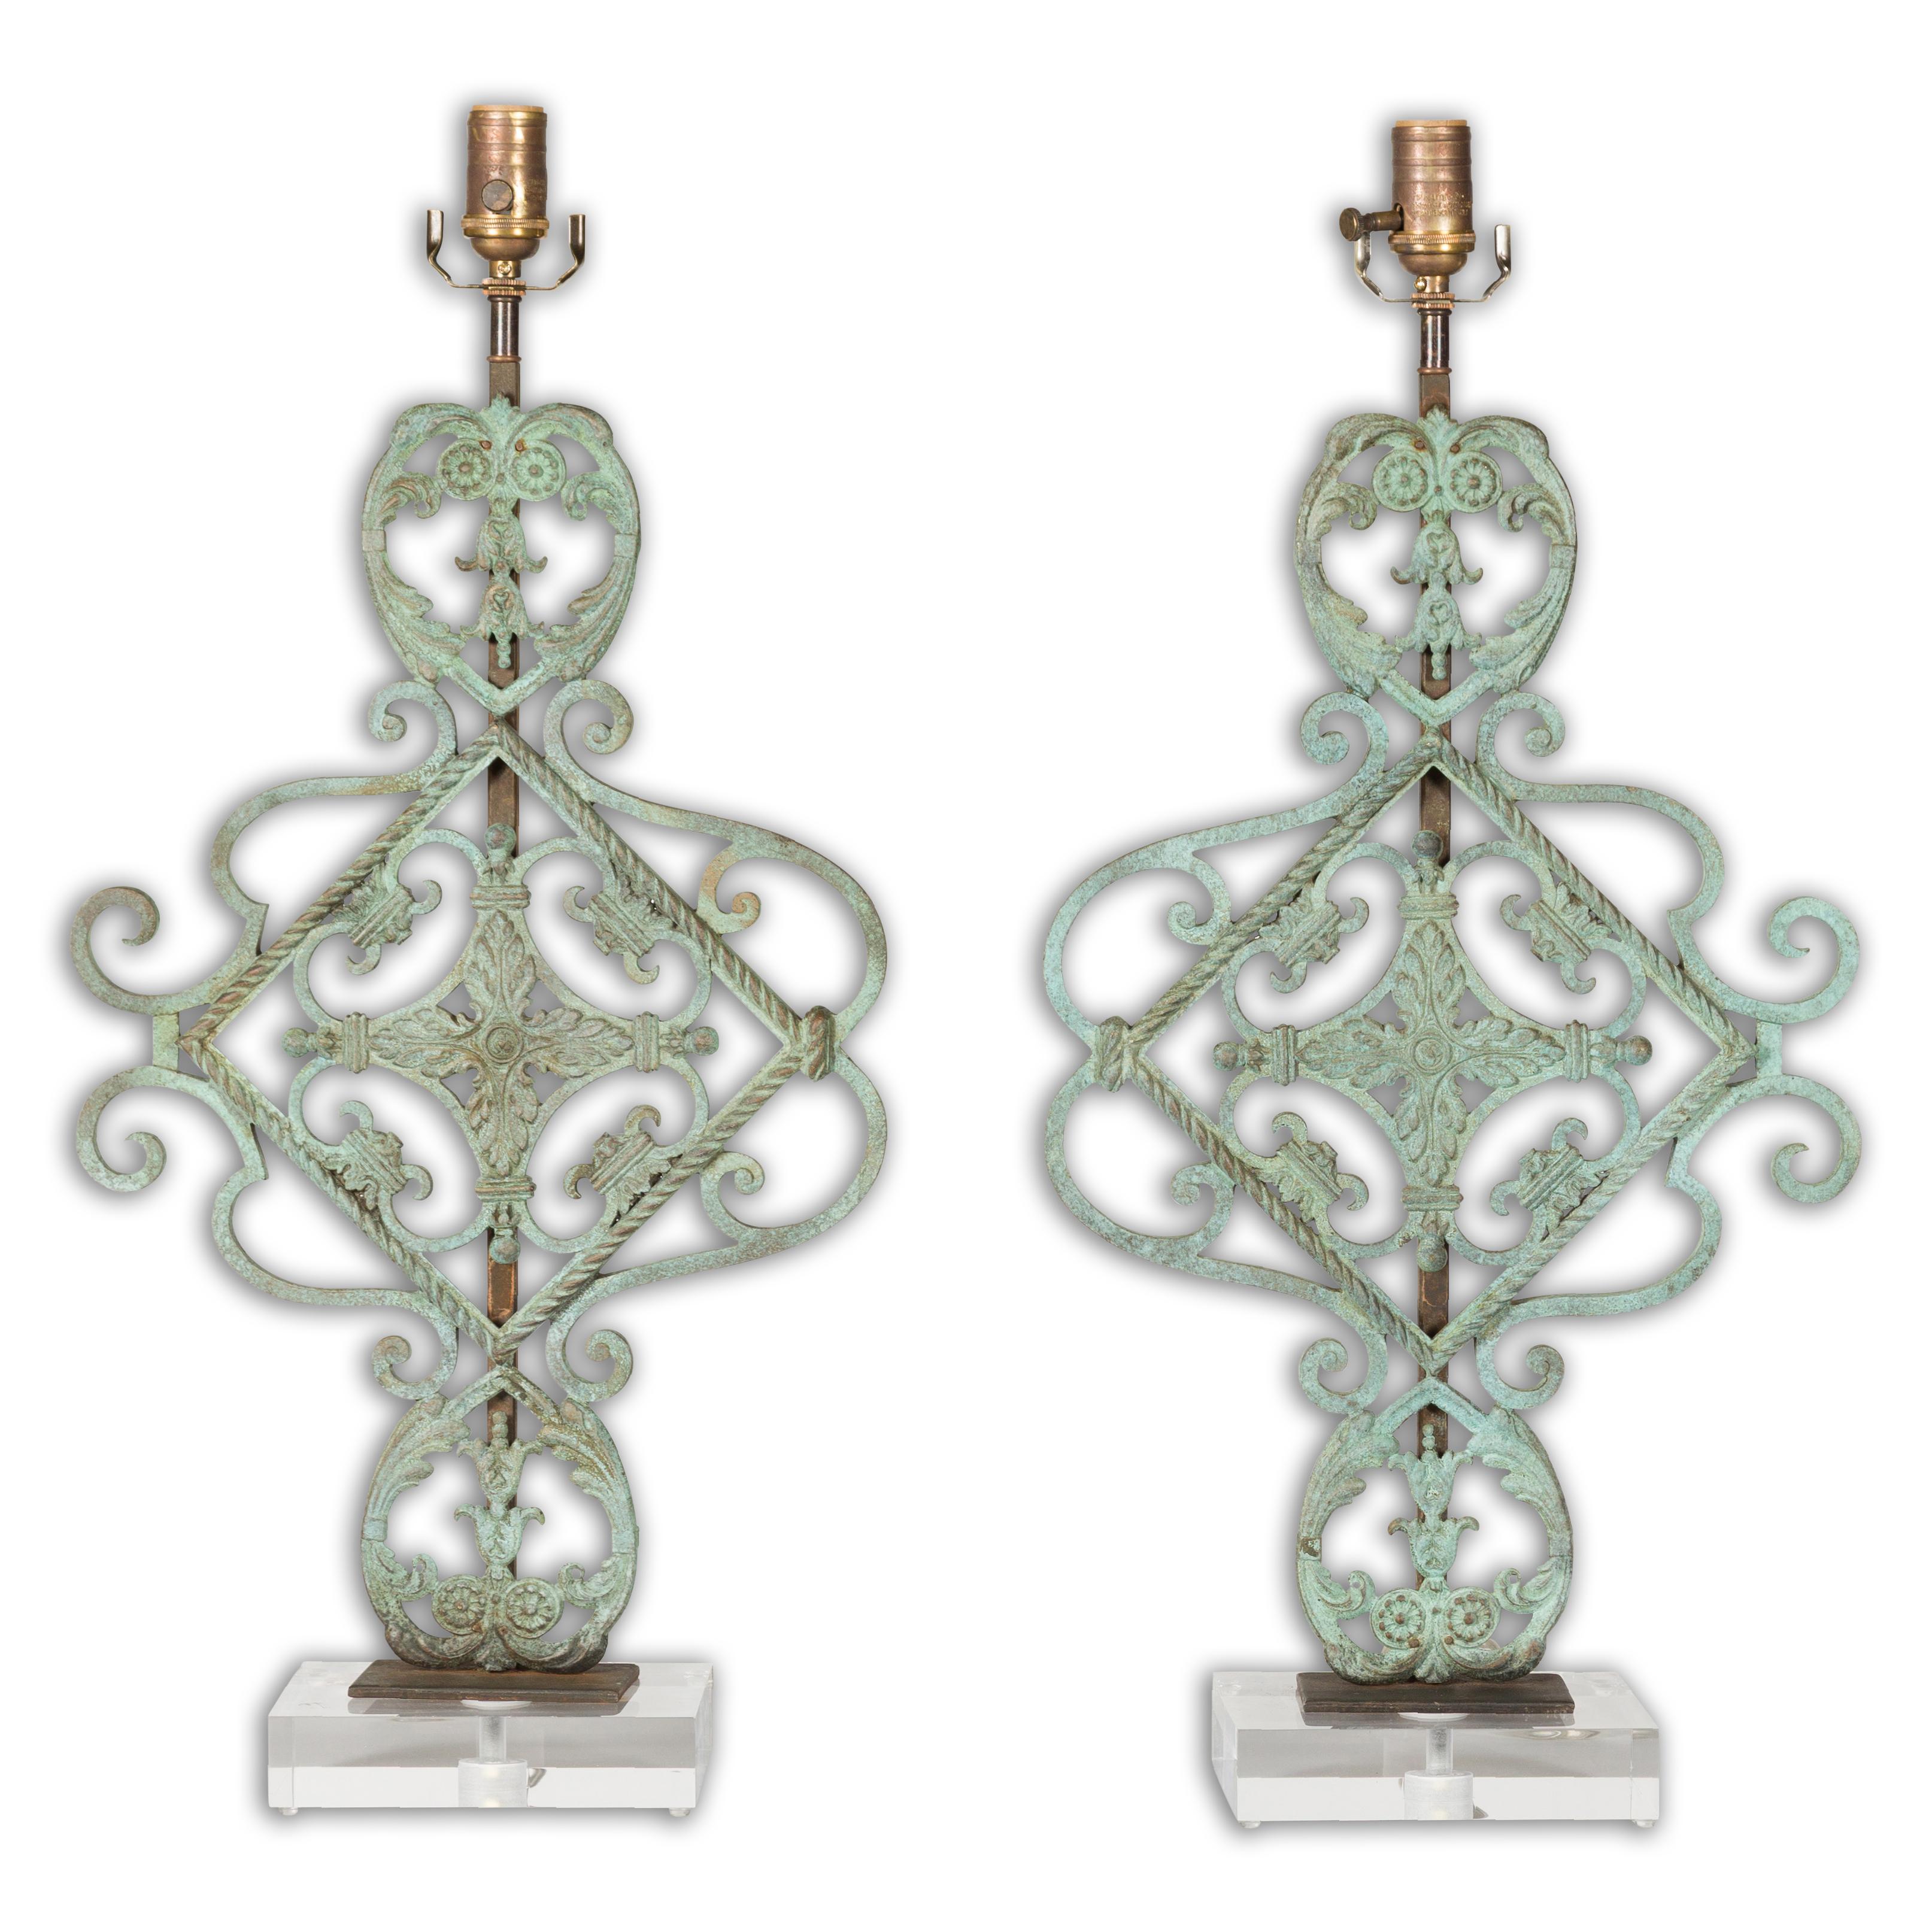 A pair of Italian Midcentury bronze table lamps with scrolling motifs, foliage, verdigris patina and custom made rectangular lucite bases. Illuminate your interiors with a blend of elegance and style, featuring this pair of Italian Midcentury bronze